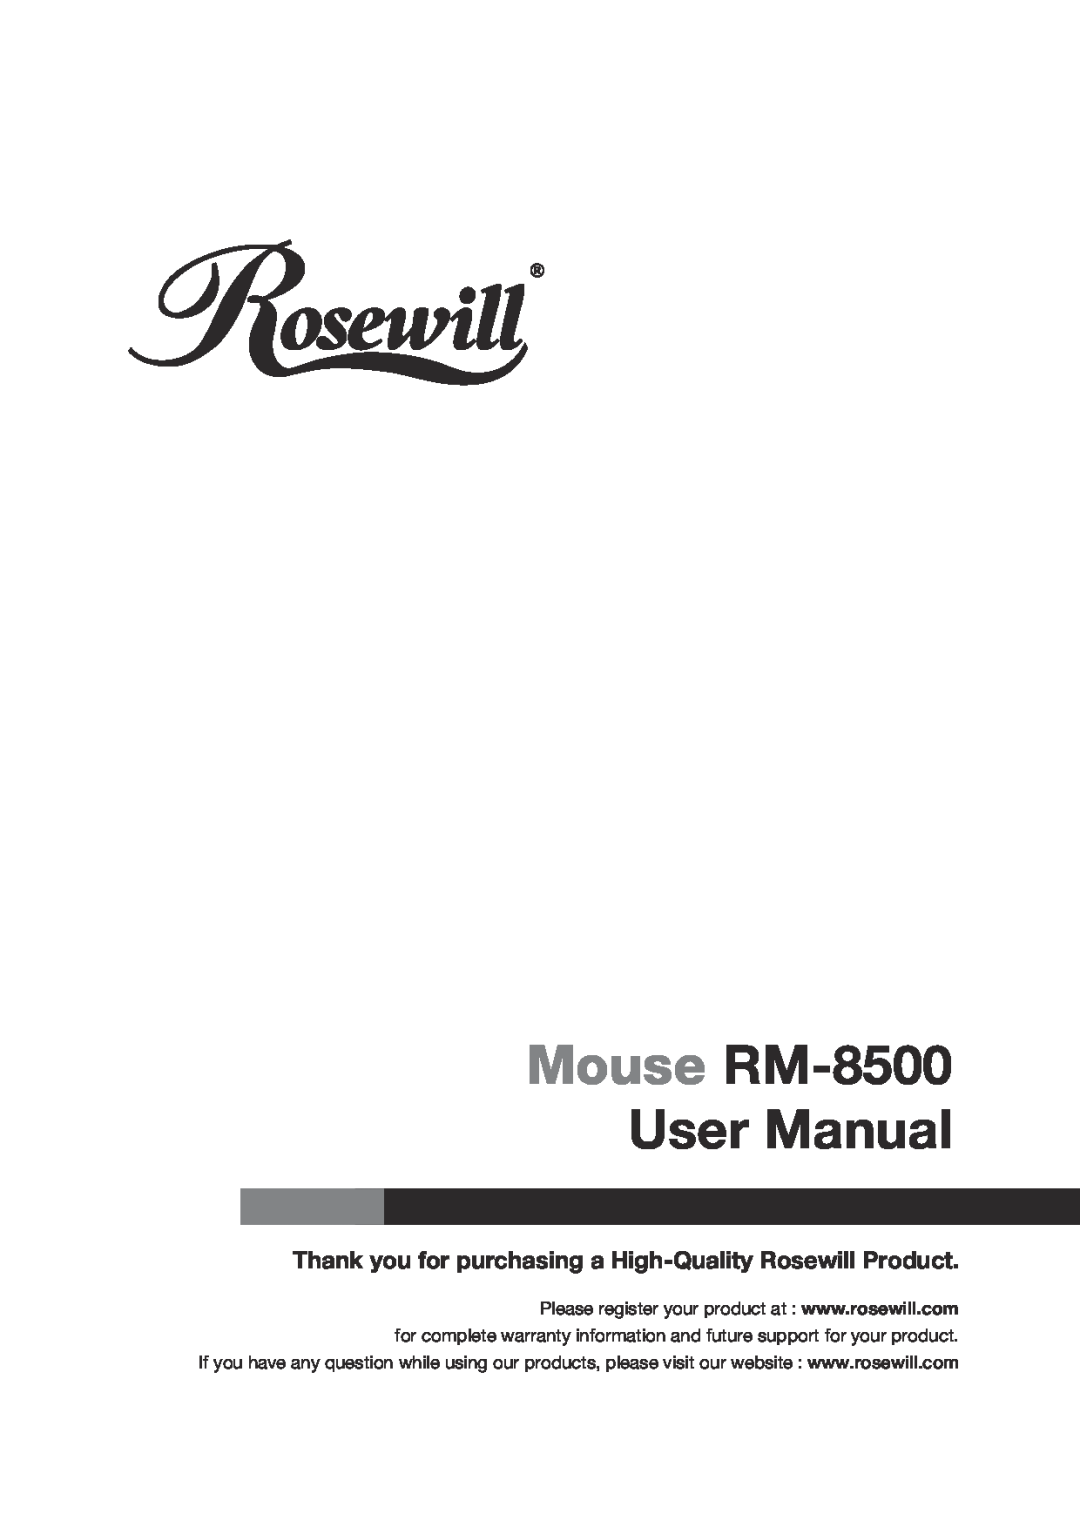 Rosewill user manual Mouse RM-8500 User Manual, Thank you for purchasing a High-Quality Rosewill Product 